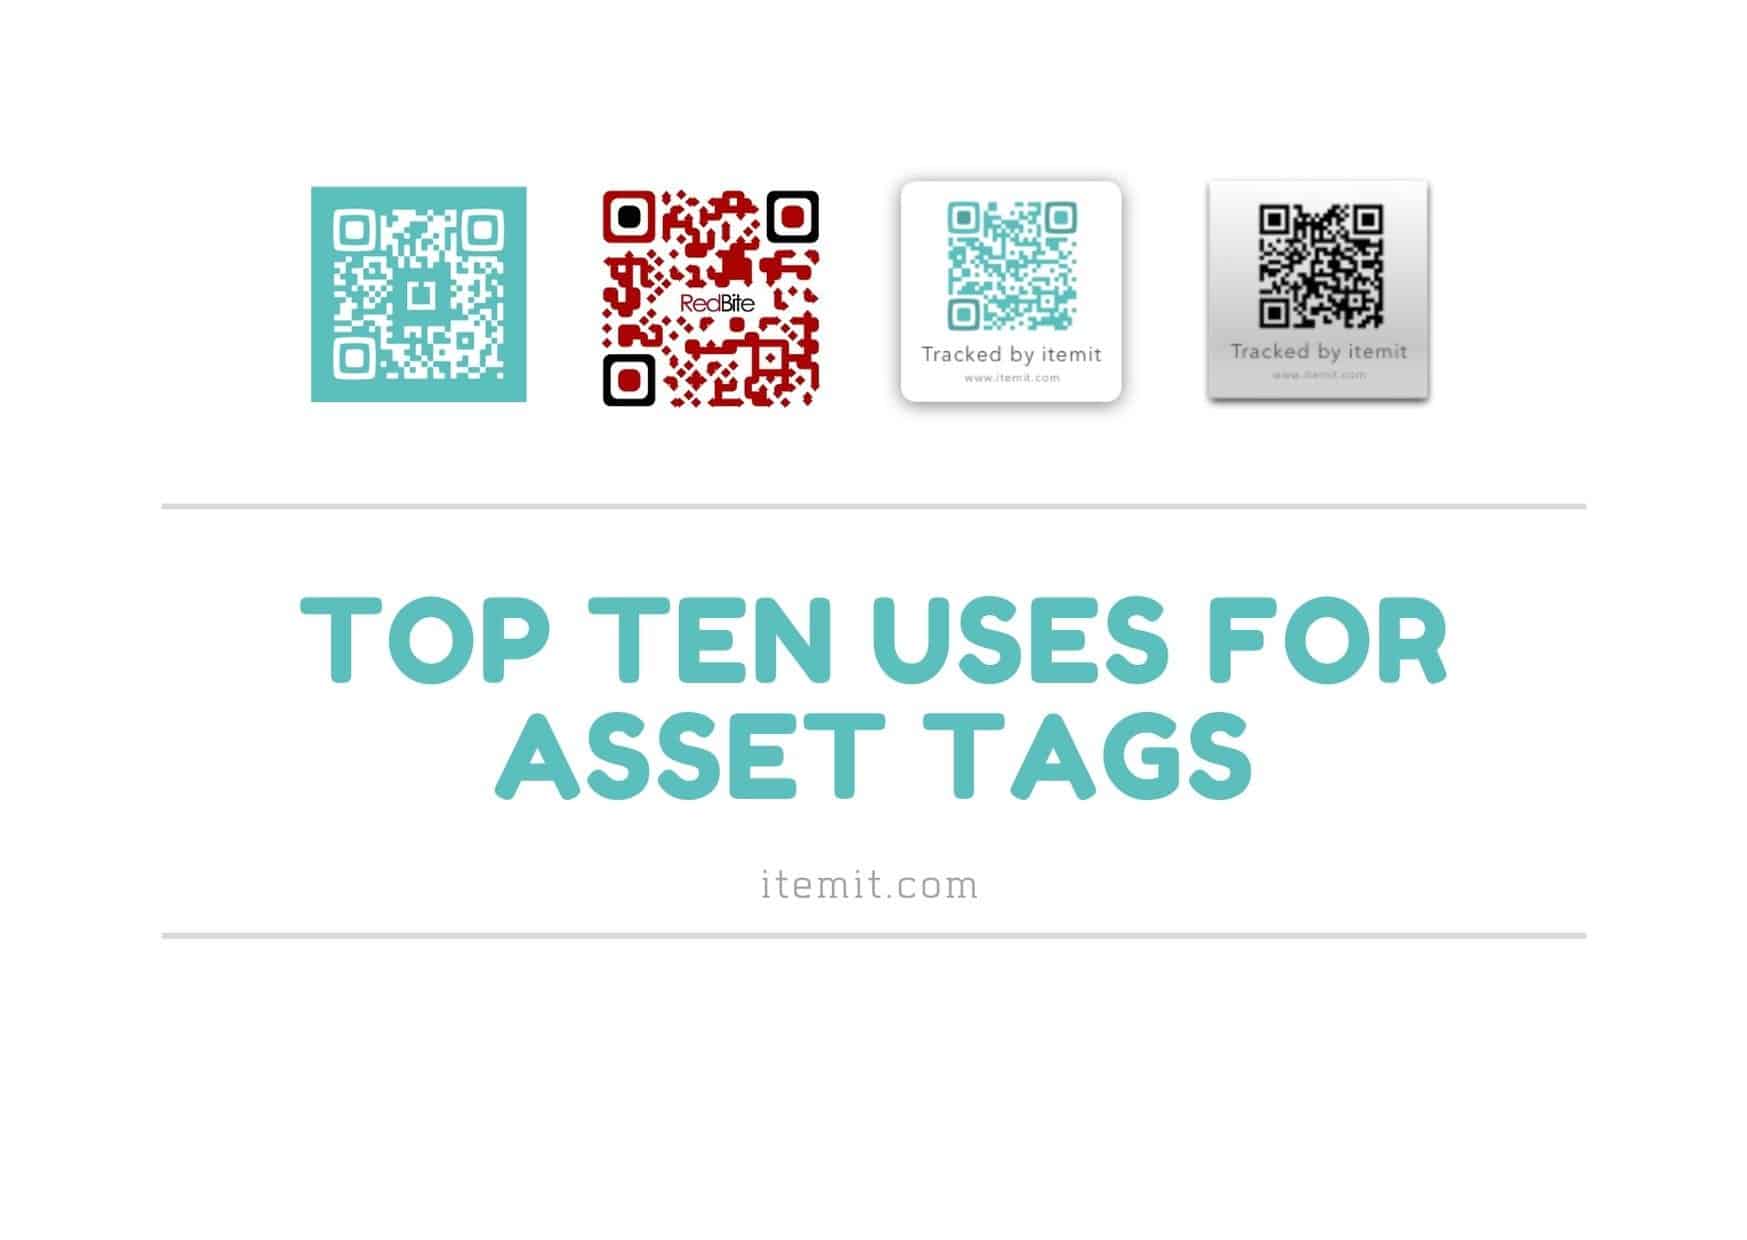 top ten uses of itemit asset tags